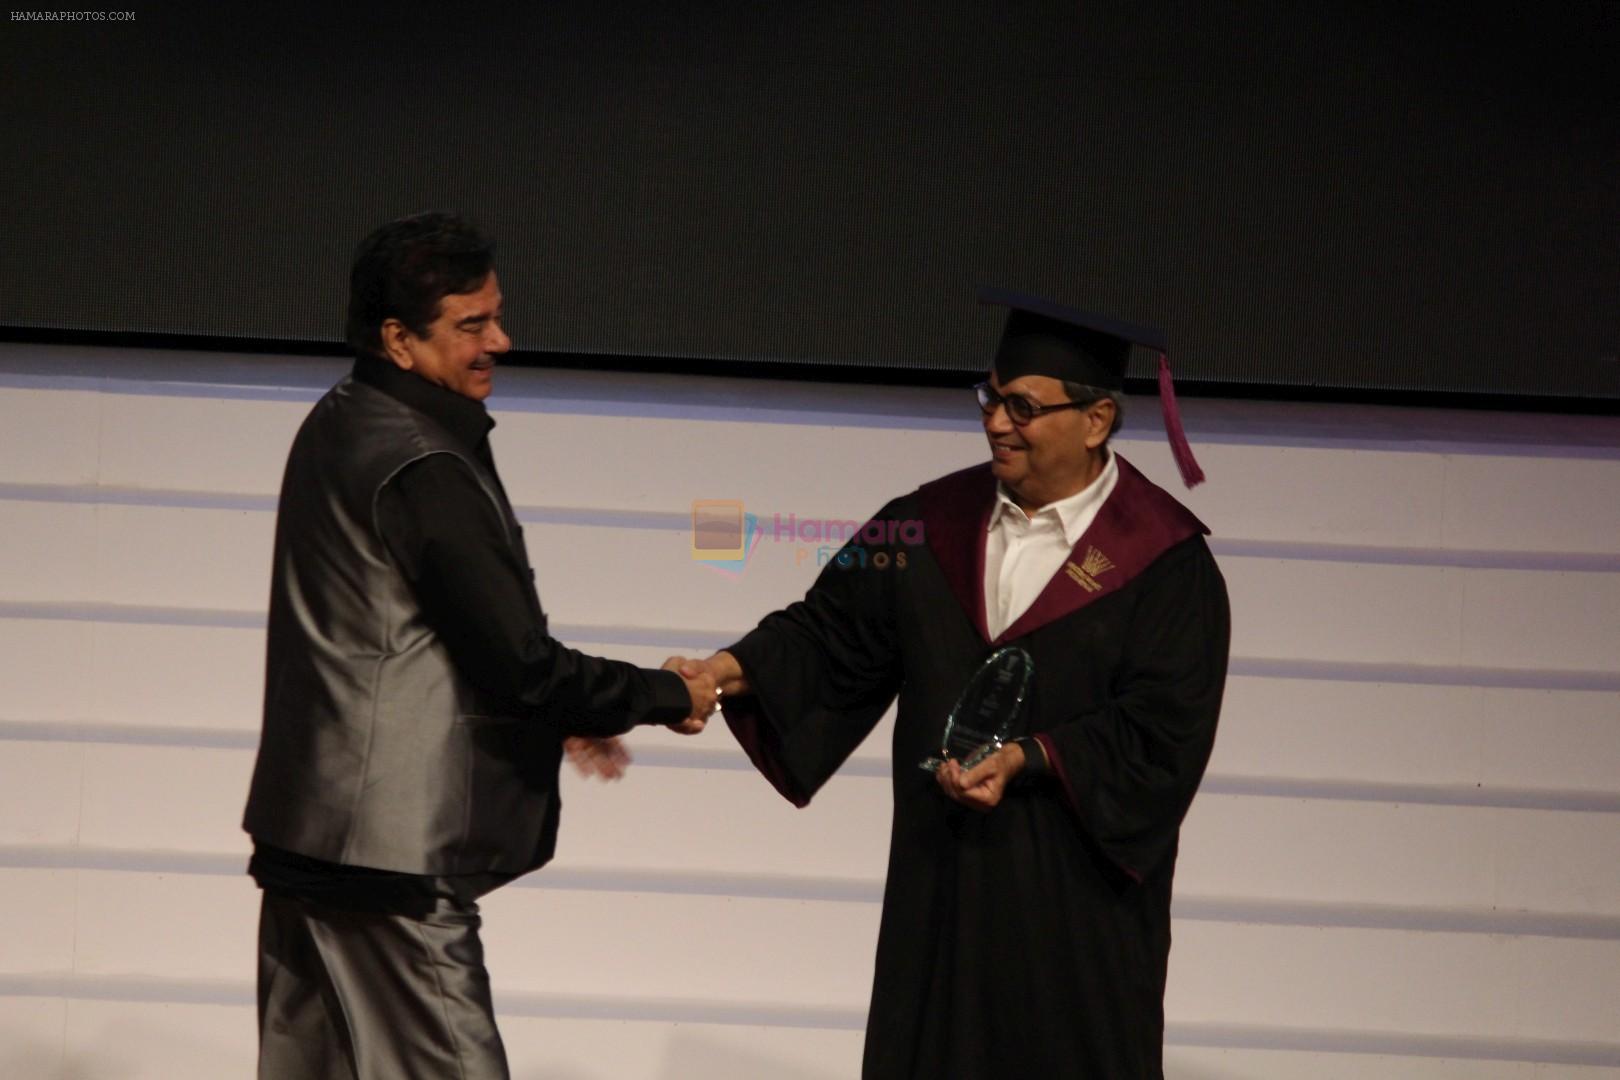 Shatrughan Sinha at the Celebration Of Whistling Woods International 10th Convocation Ceremony on 18th July 2017